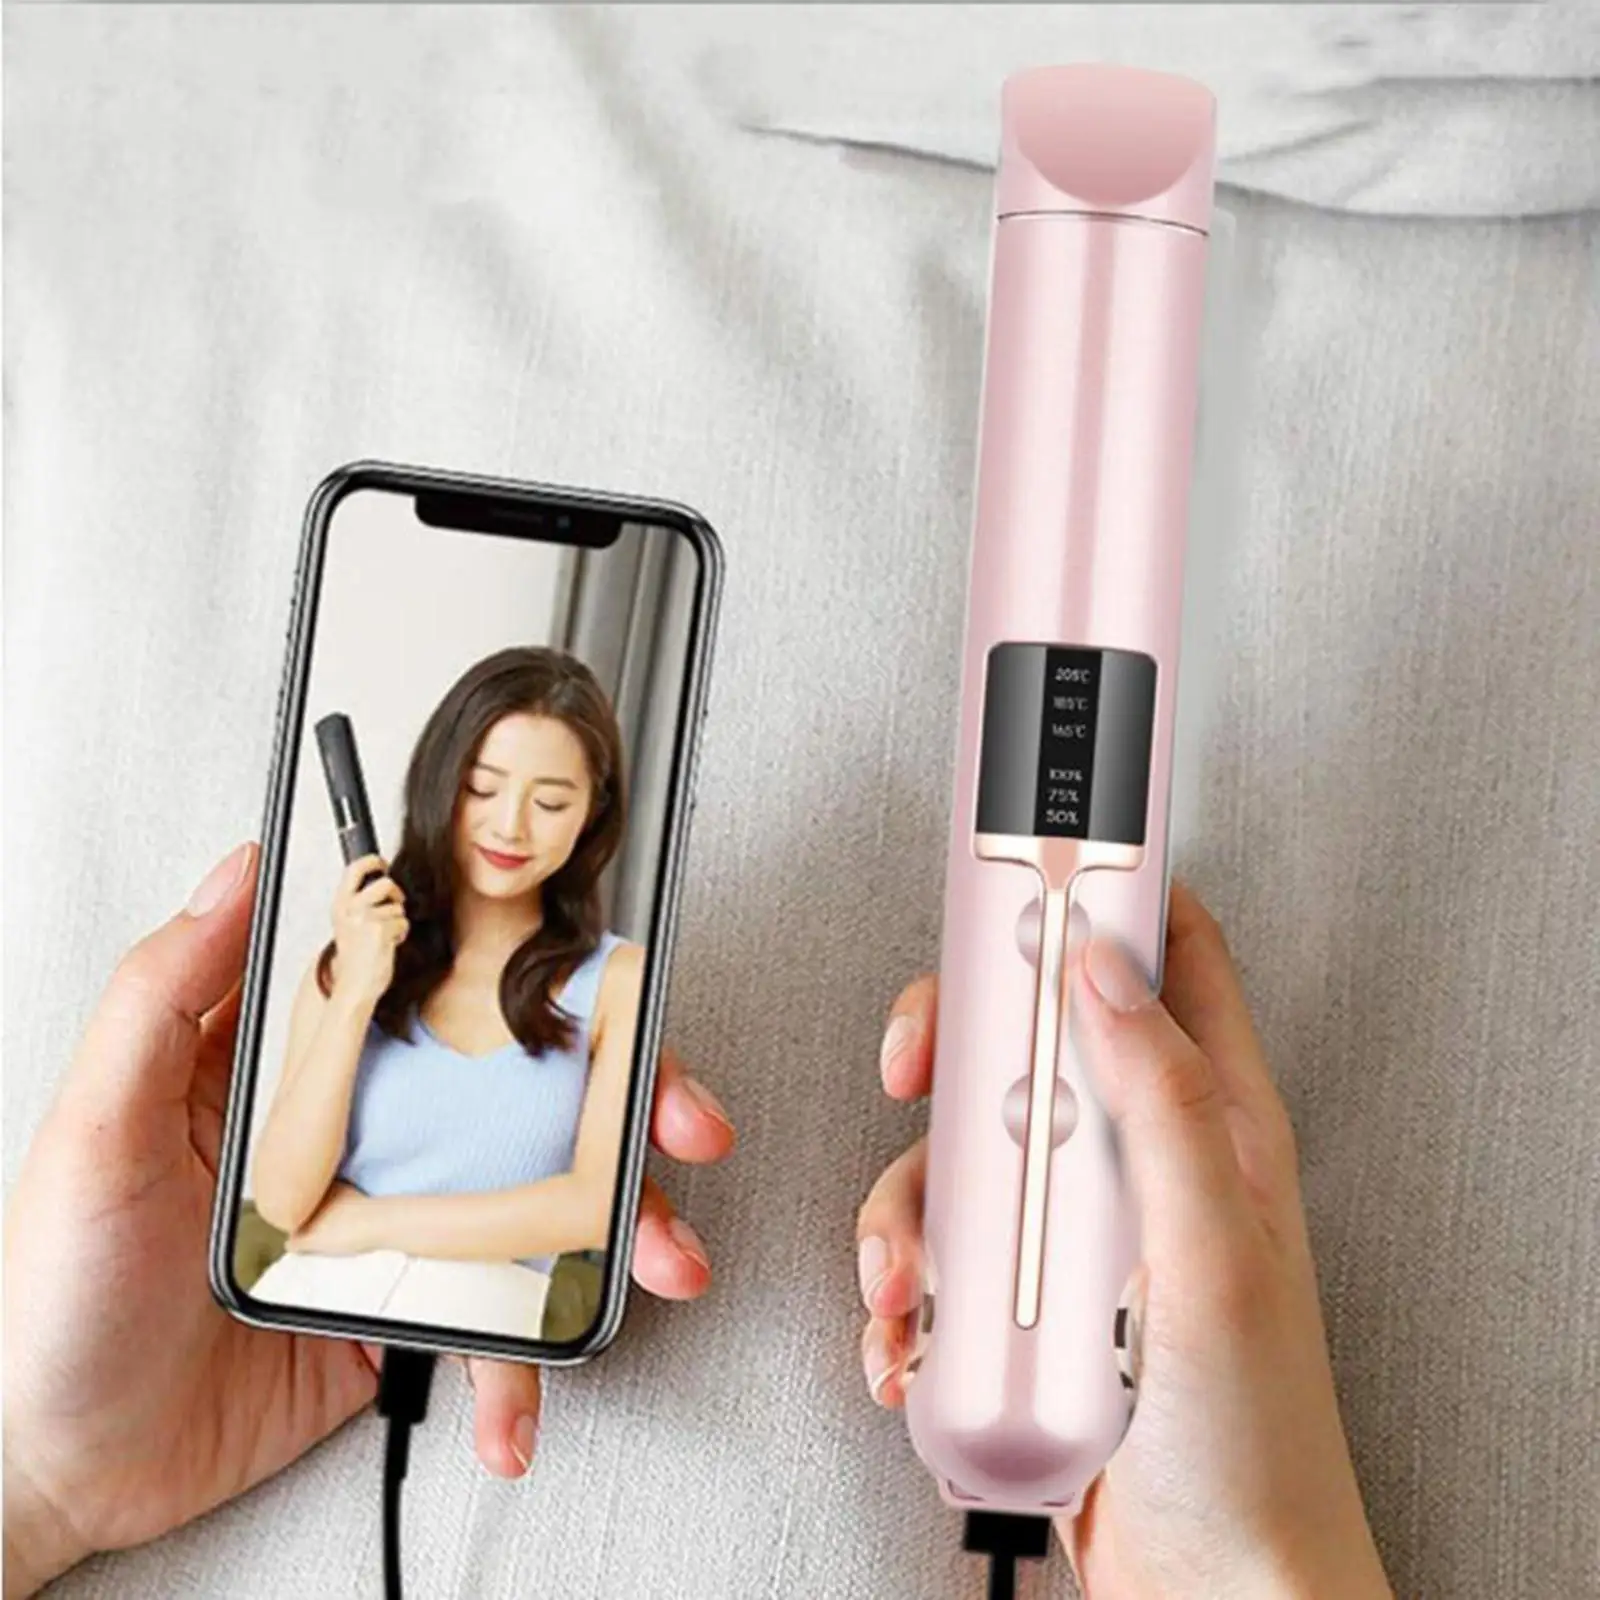 Portable Cordless Hair Curler Straightener 3 Temp ABS USB Charging Automatic Styling Tools for Salon Curls DIY Waves Women Men